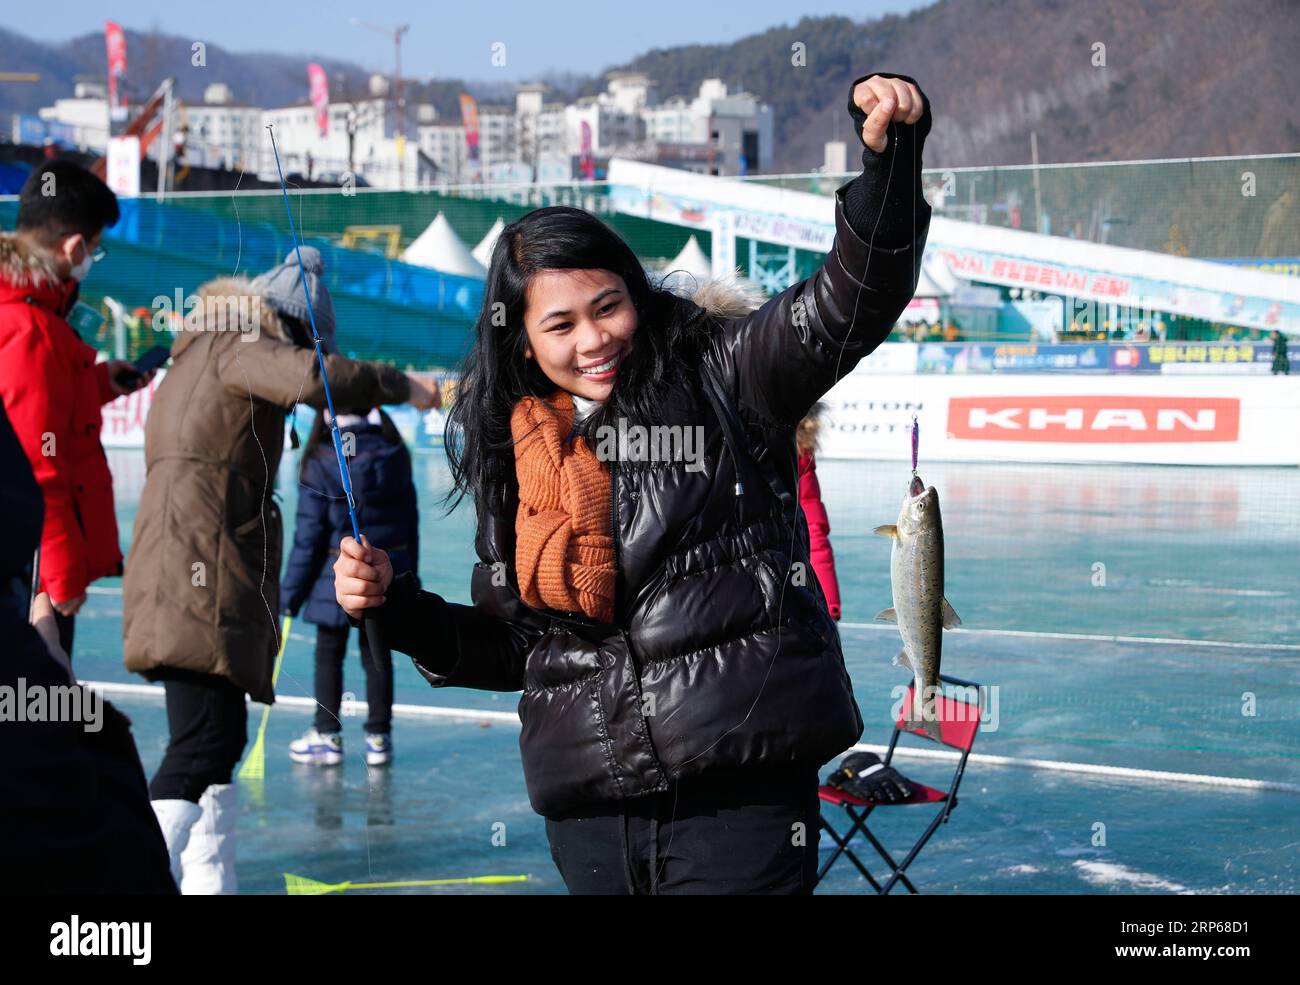 (190105) -- HWACHEON, Jan. 5, 2019 -- A woman shows a trout she caught on a frozen river during the Sancheoneo Ice Festival in Hwacheon, South Korea, Jan. 5, 2019. As one of the biggest winter events in South Korea, the annual three-week festival draws people to the frozen Hwacheon river, where organizers drill fishing holes in the ice and release trouts into the river during the festival period. This year the festival lasts from Jan. 5 to Jan. 27. ) SOUTH KOREA-HWACHEON-SANCHEONEO ICE FESTIVAL WangxJingqiang PUBLICATIONxNOTxINxCHN Stock Photo